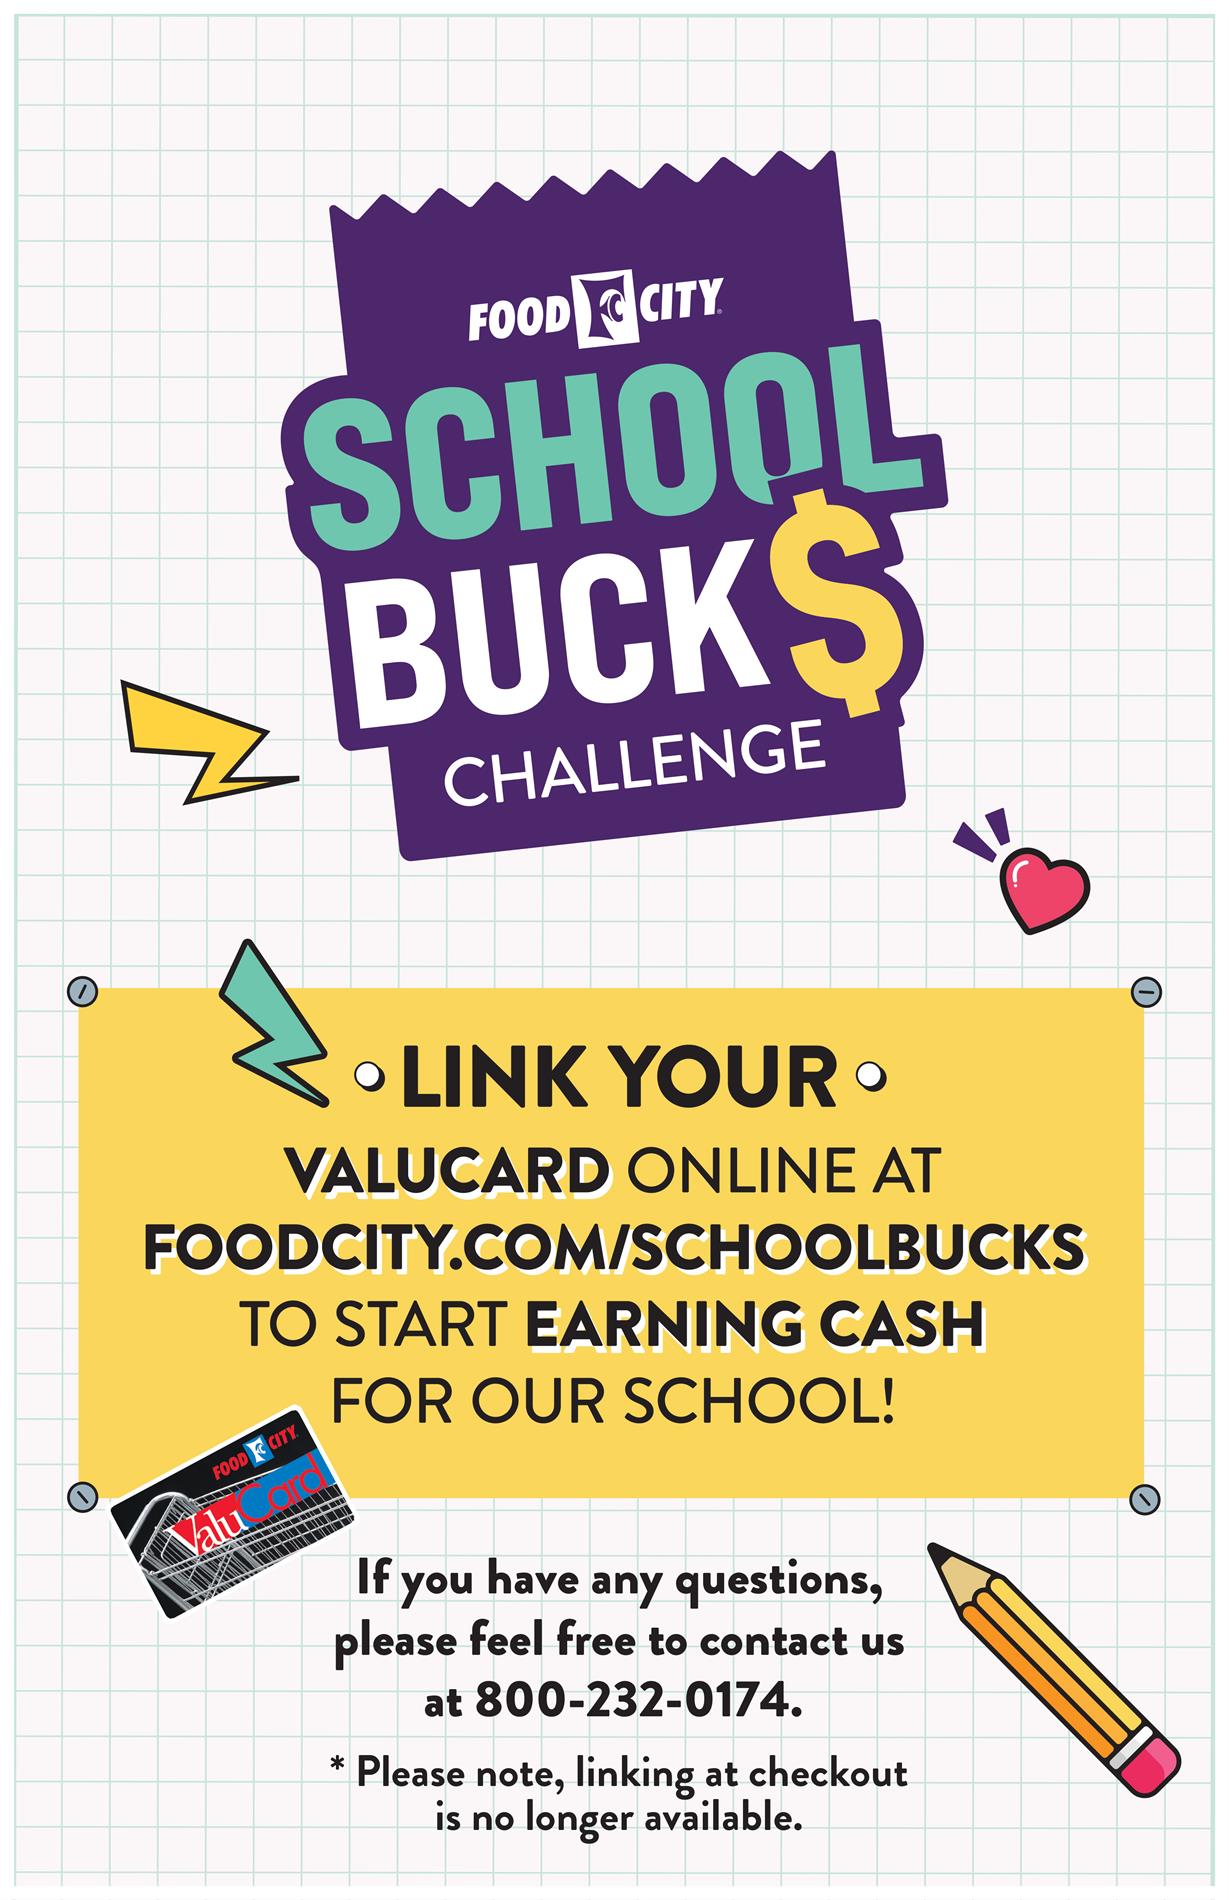 Register your Food City card for the school to receive School Bucks